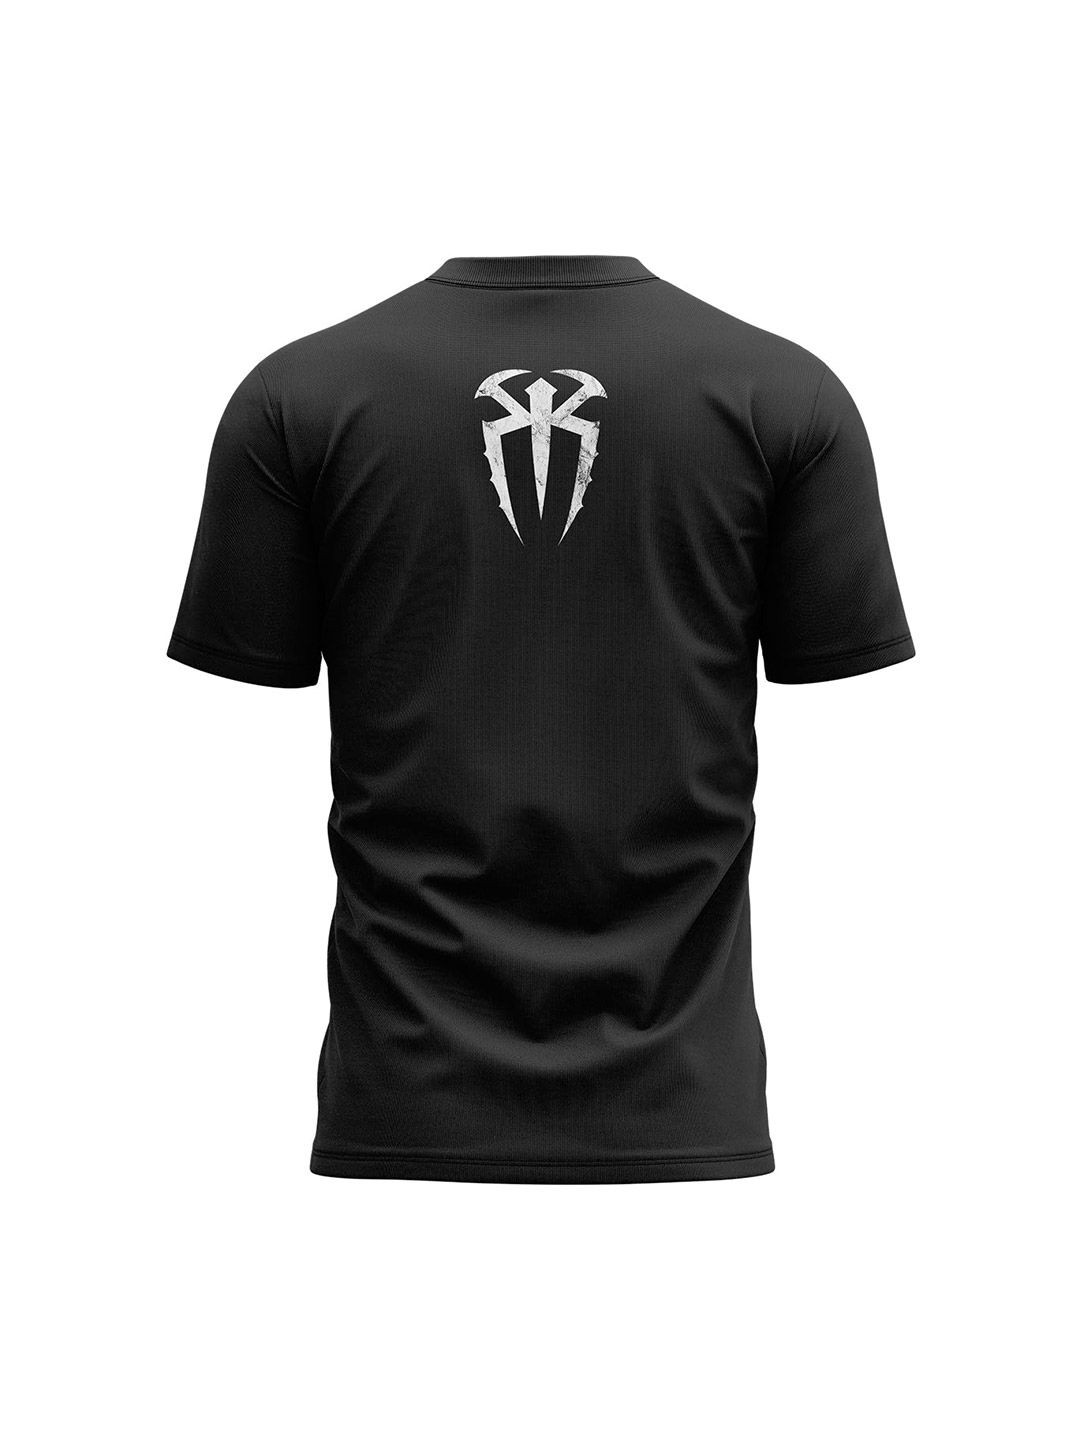 Buy Official WWE Roman Reigns "Head Of The Table" Men's Regular Fit T-shirt WWE Online | FanCode Shop